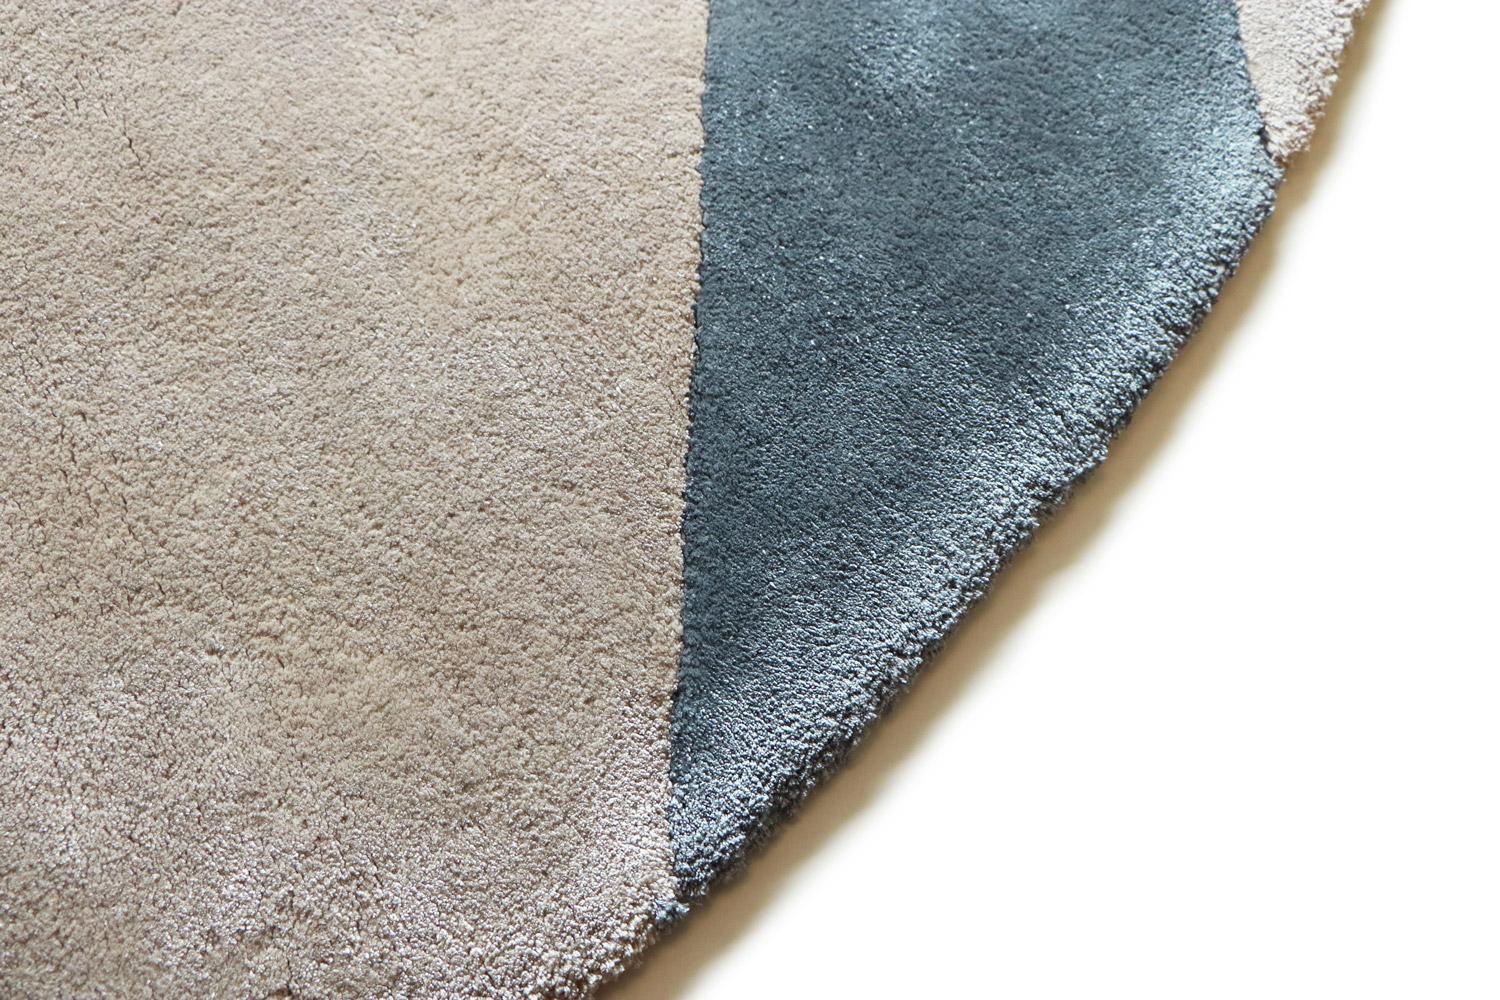 Other Circular Soft EcoCompatible Pastel Colors Design Rug by Deanna Comellini ø300 cm For Sale